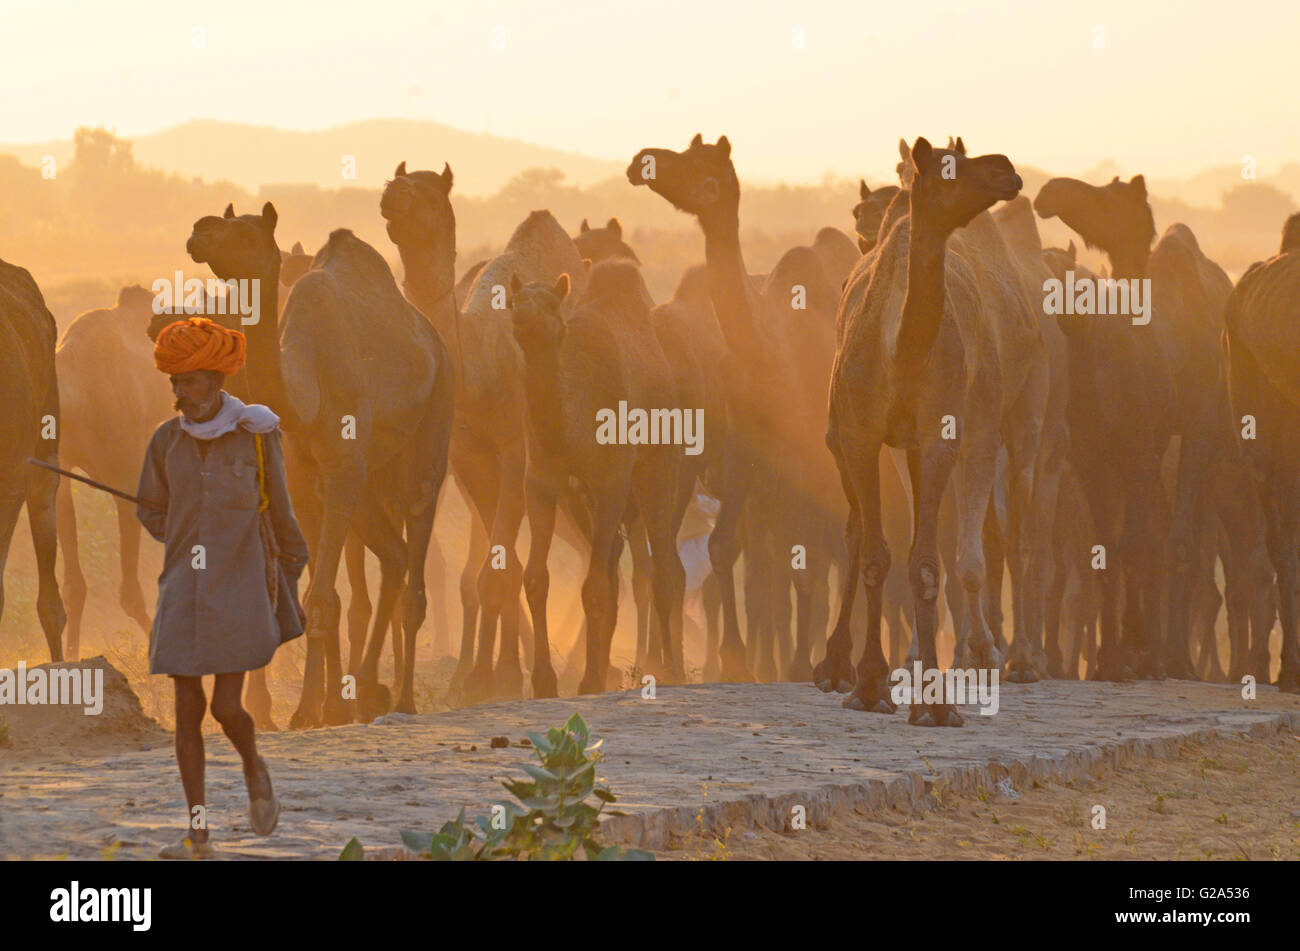 A villager herding his camels to home, Pushkar Camel Fair, Rajasthan, India Stock Photo